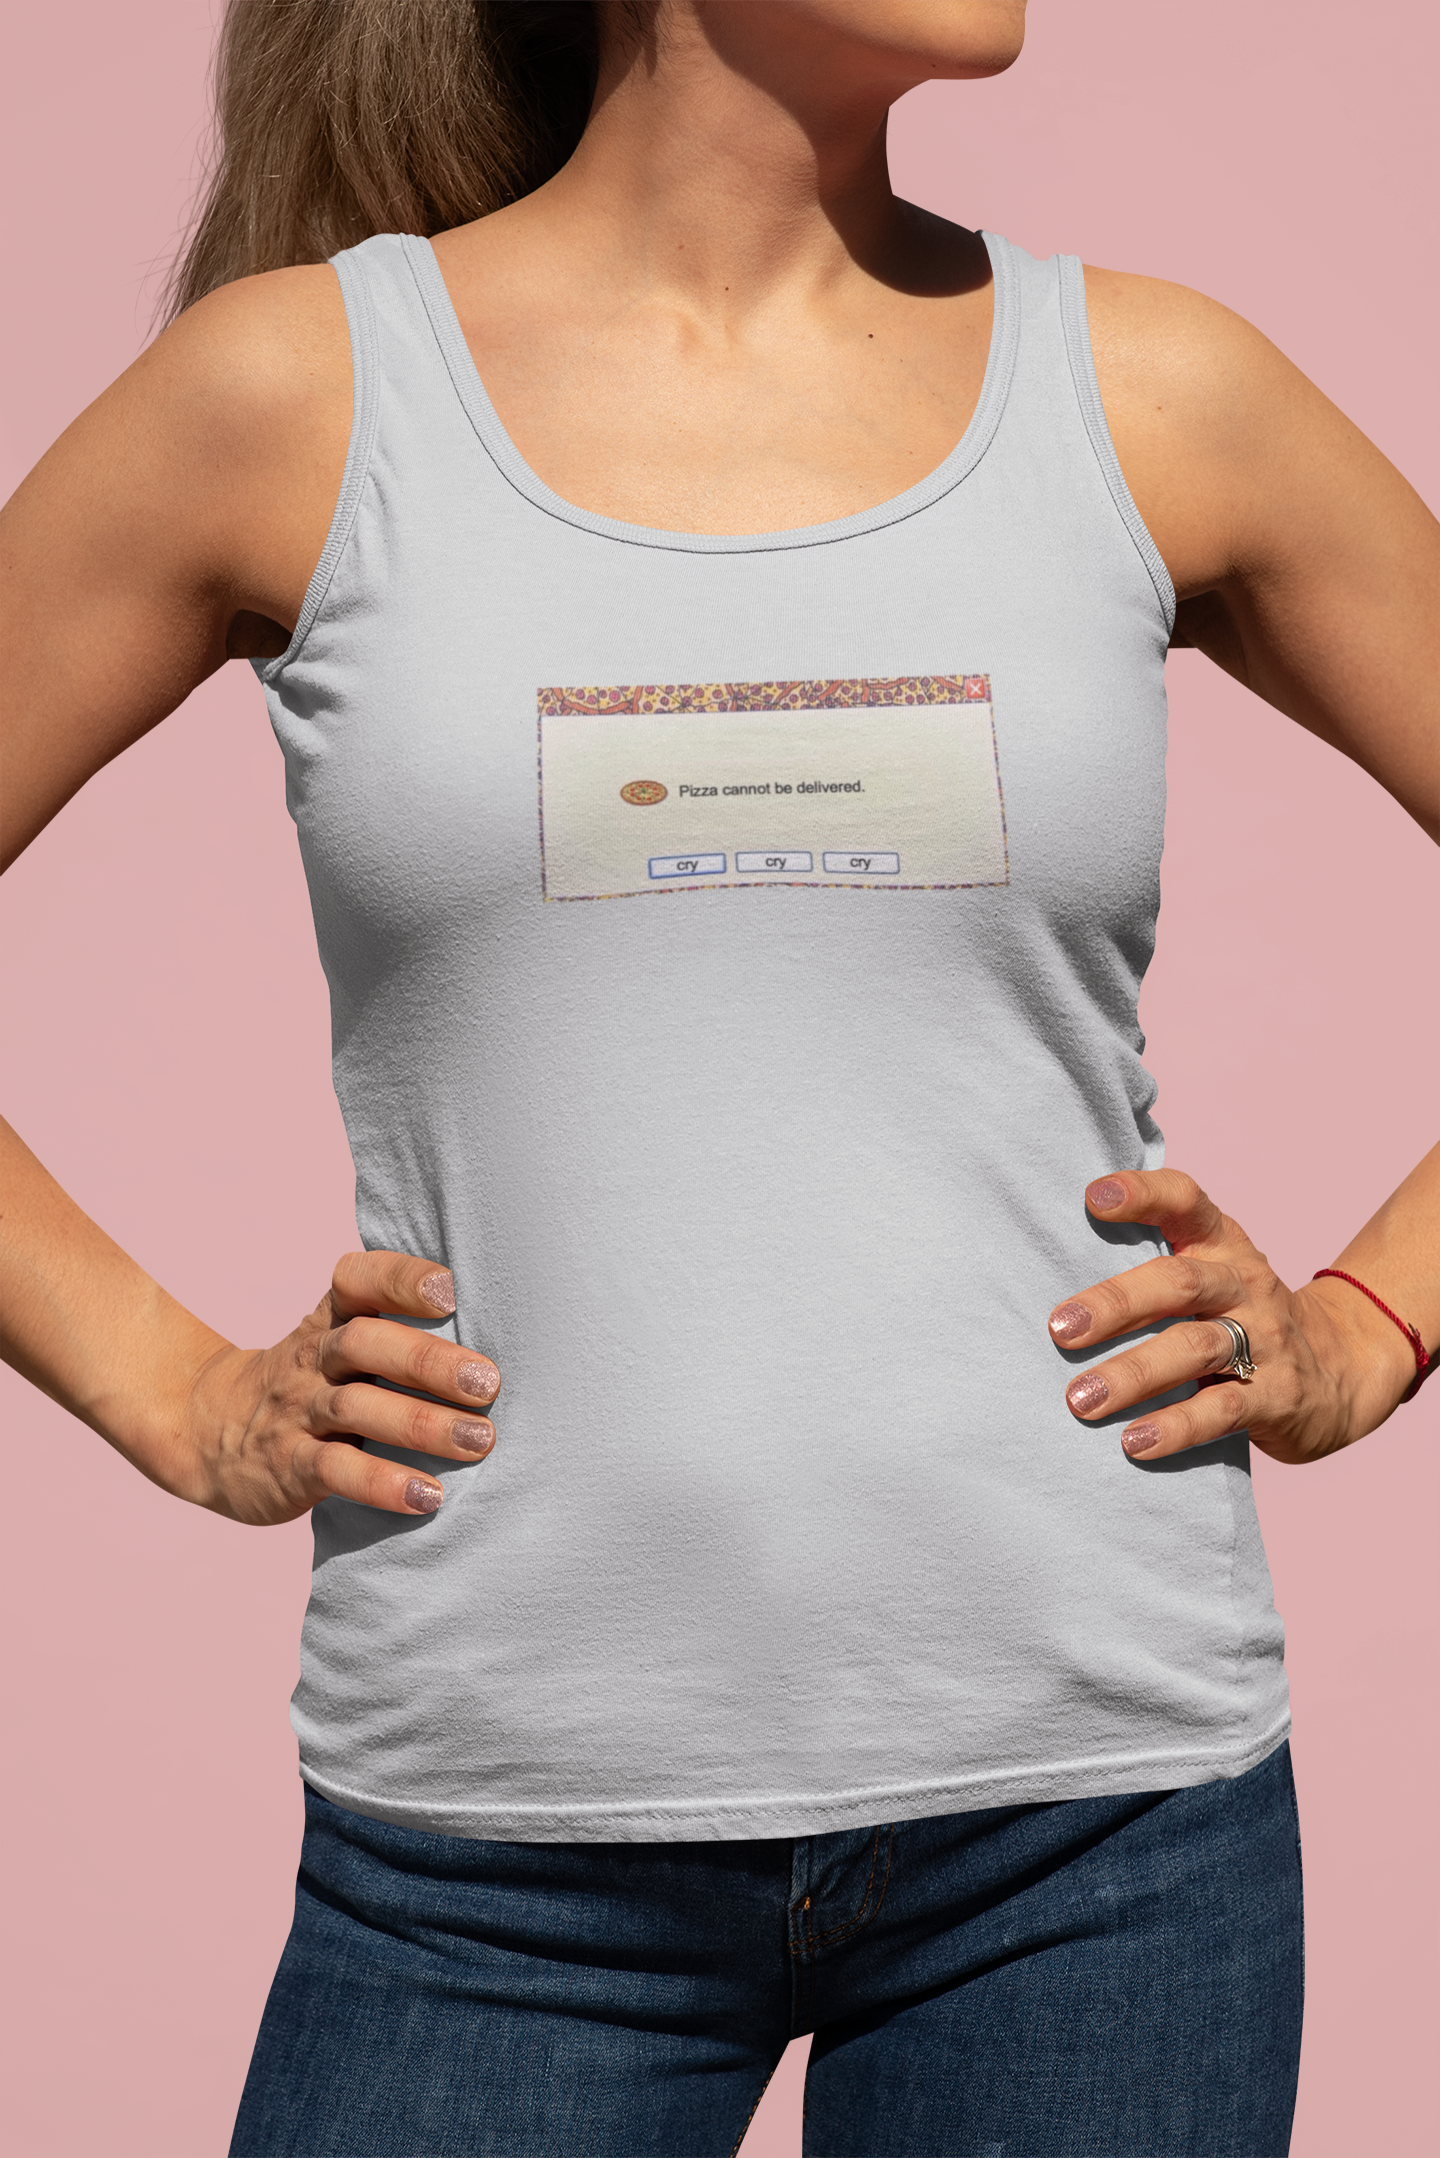 Pizza Canot Be Delivered Minimals Women Tank Top- FunkyTeesClub